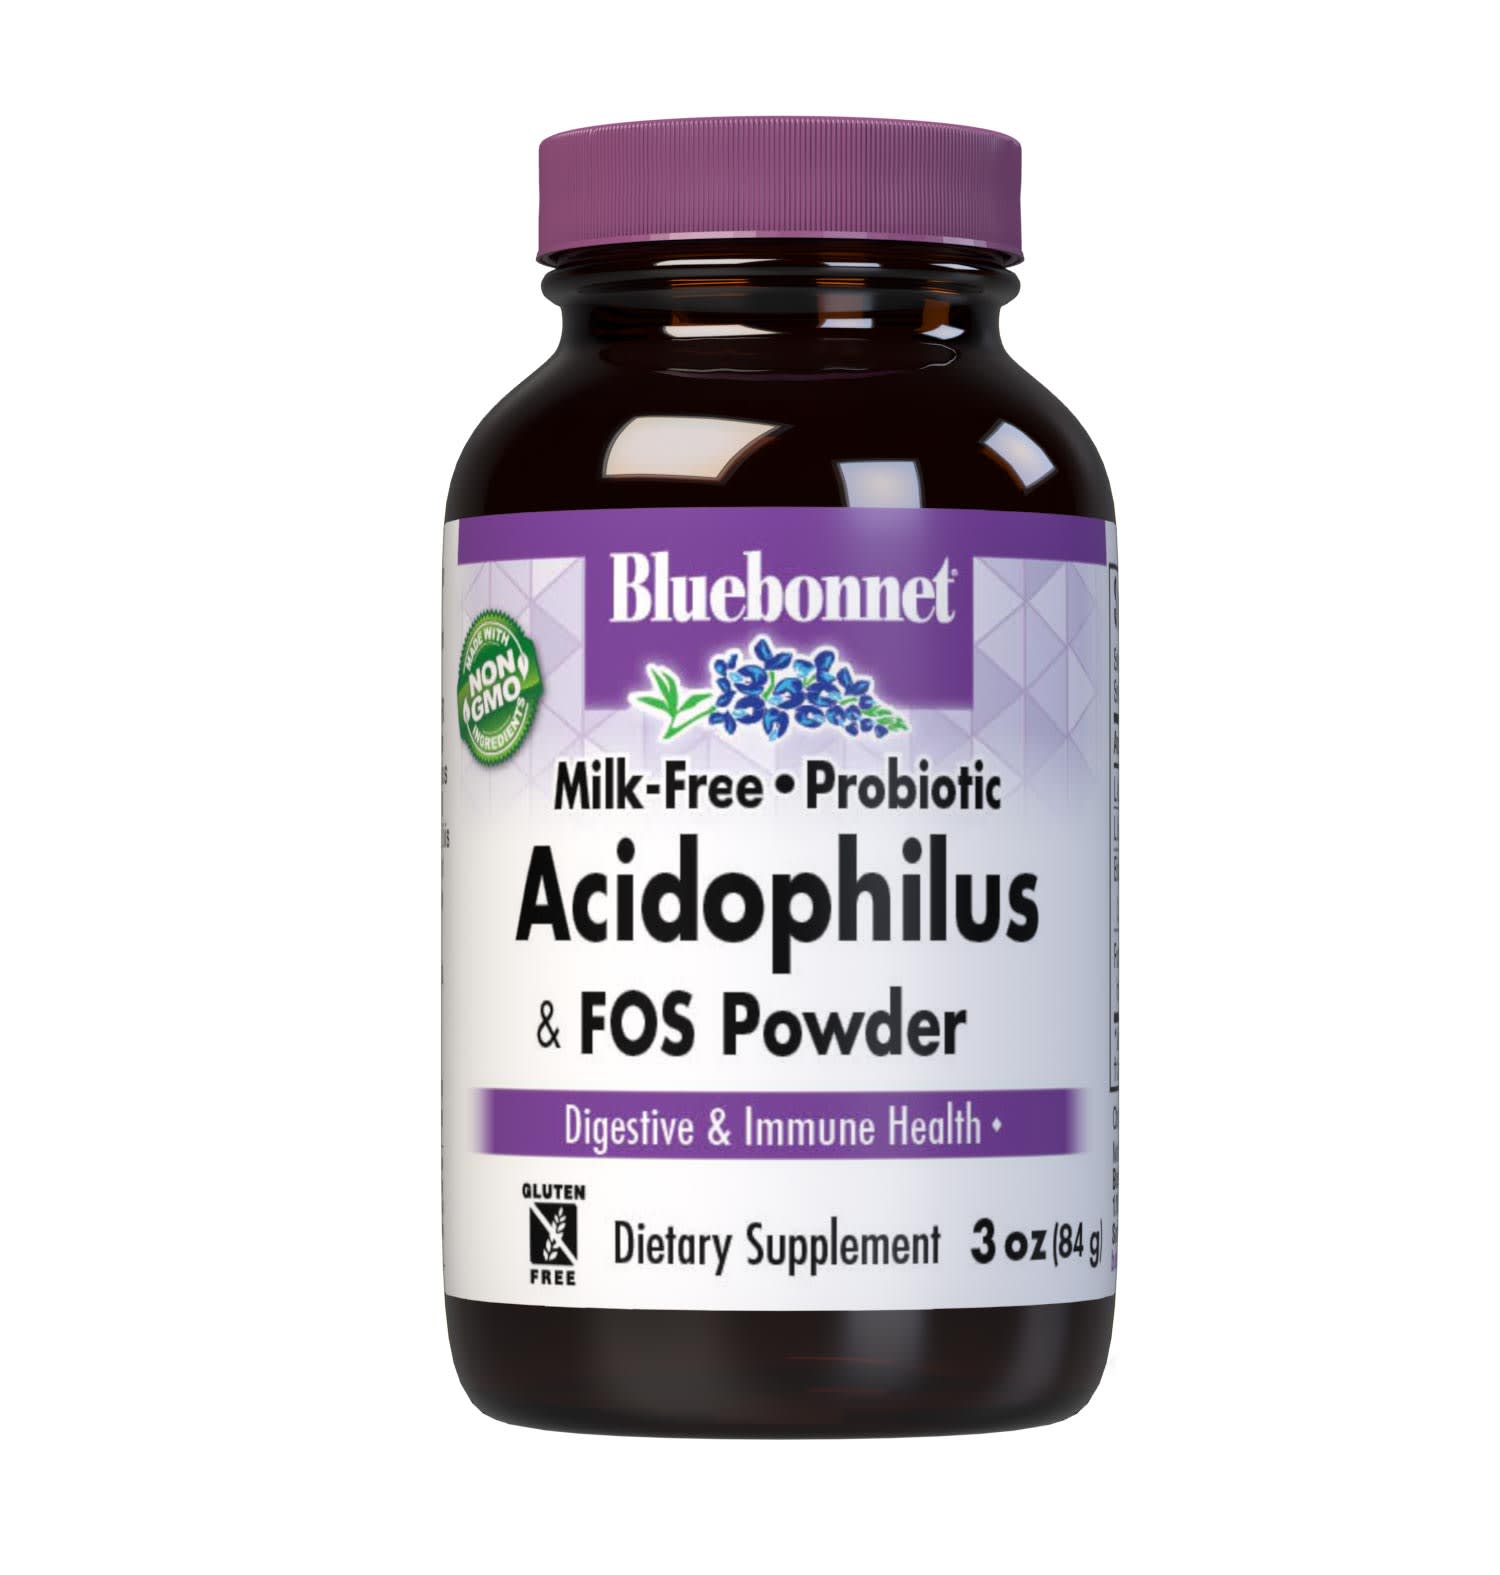 Bluebonnet’s Milk-Free Probiotic Acidophilus & FOS powder is formulated with 10 billion viable cultures from lactobacillus acidophilus, lactobacillus bulgaricus, bifidobacterium bifidum strains along with FOS (fructooligosaccharides) from chicory root extract. This probiotic formula is designed to assist the growth of friendly bacteria in the gut to help support digestive and immune health. #size_3 oz